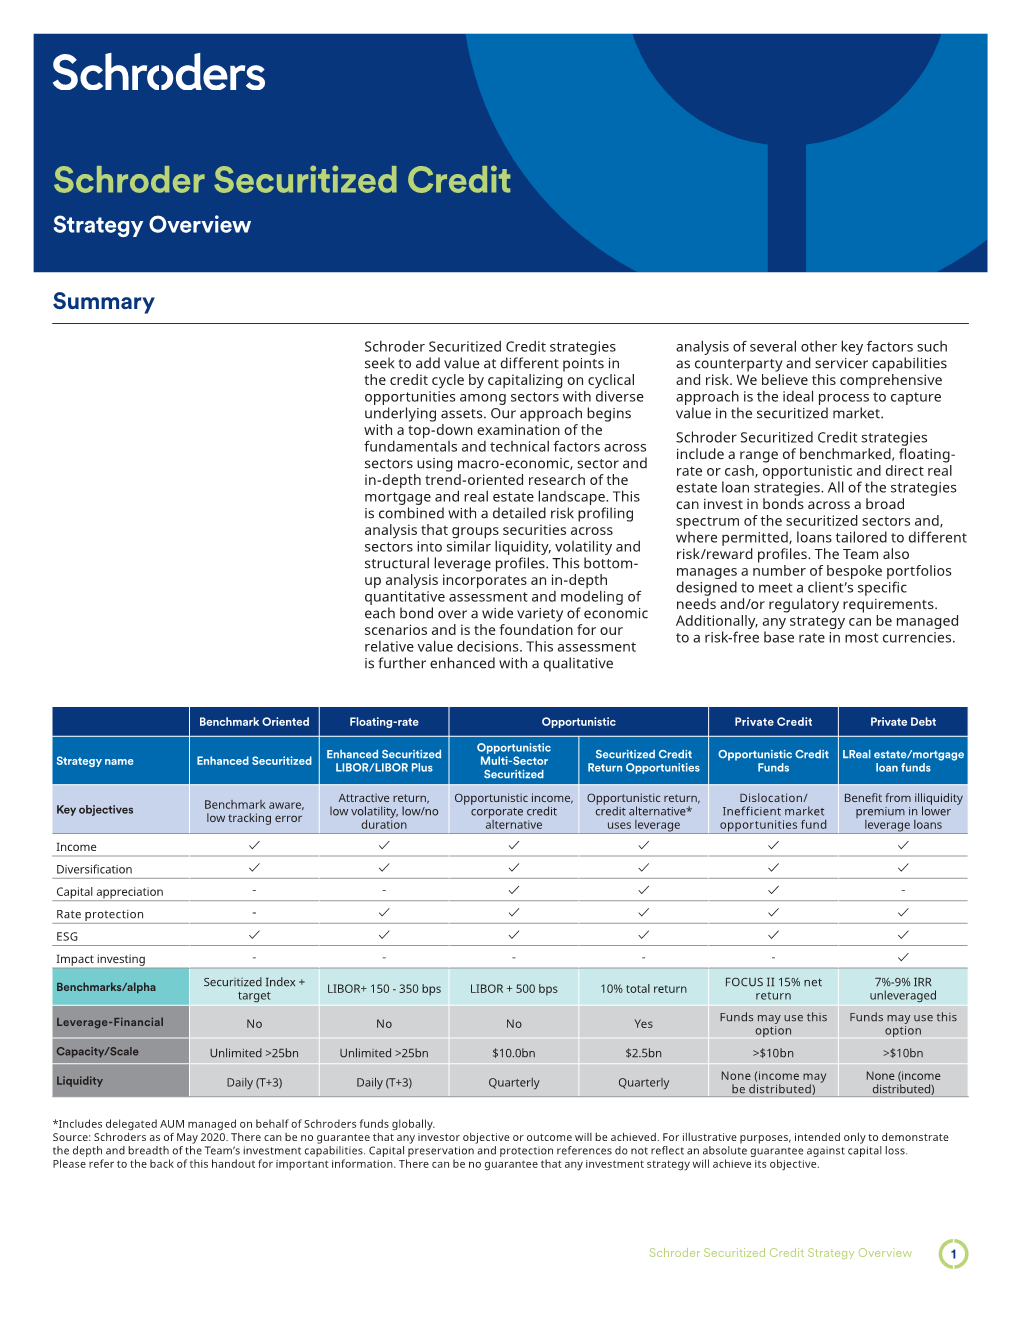 Schroder Securitized Credit Strategy Overview